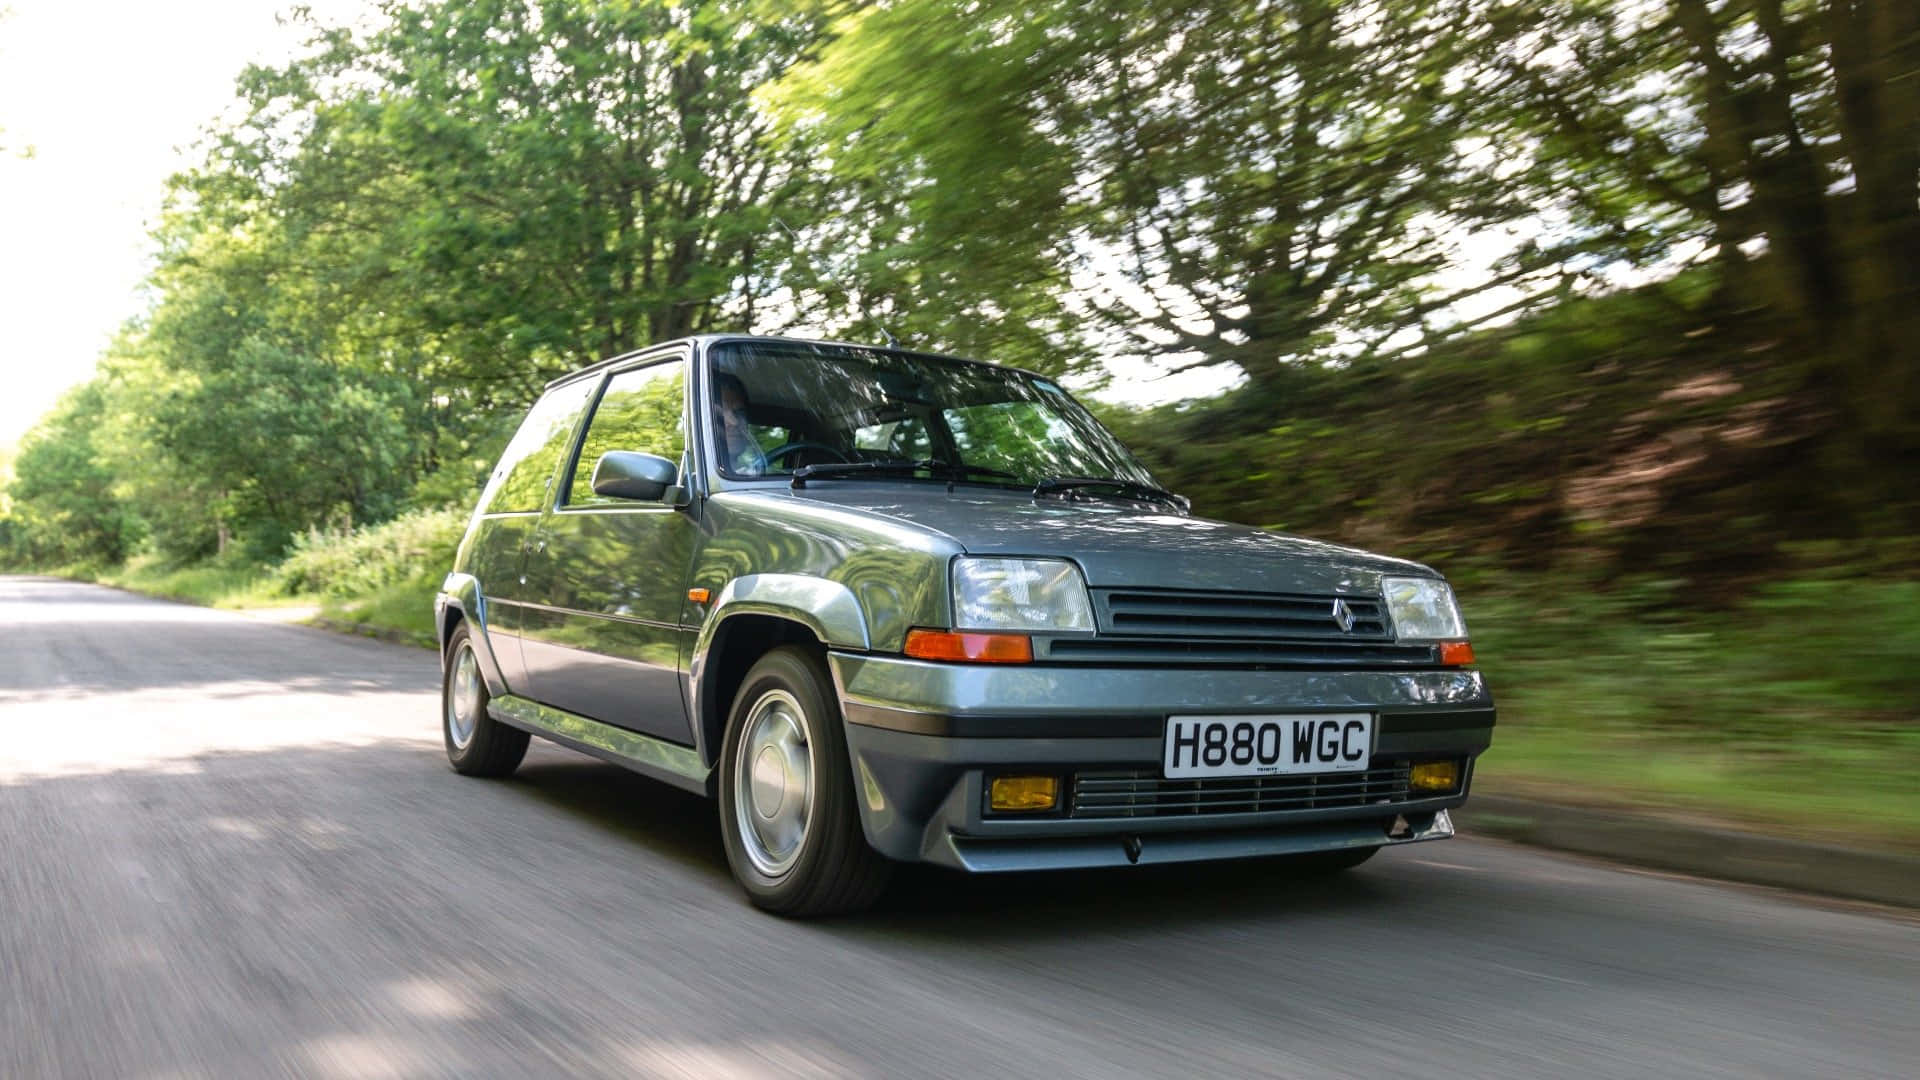 Classic Renault 5 Turbo in Action Wallpaper